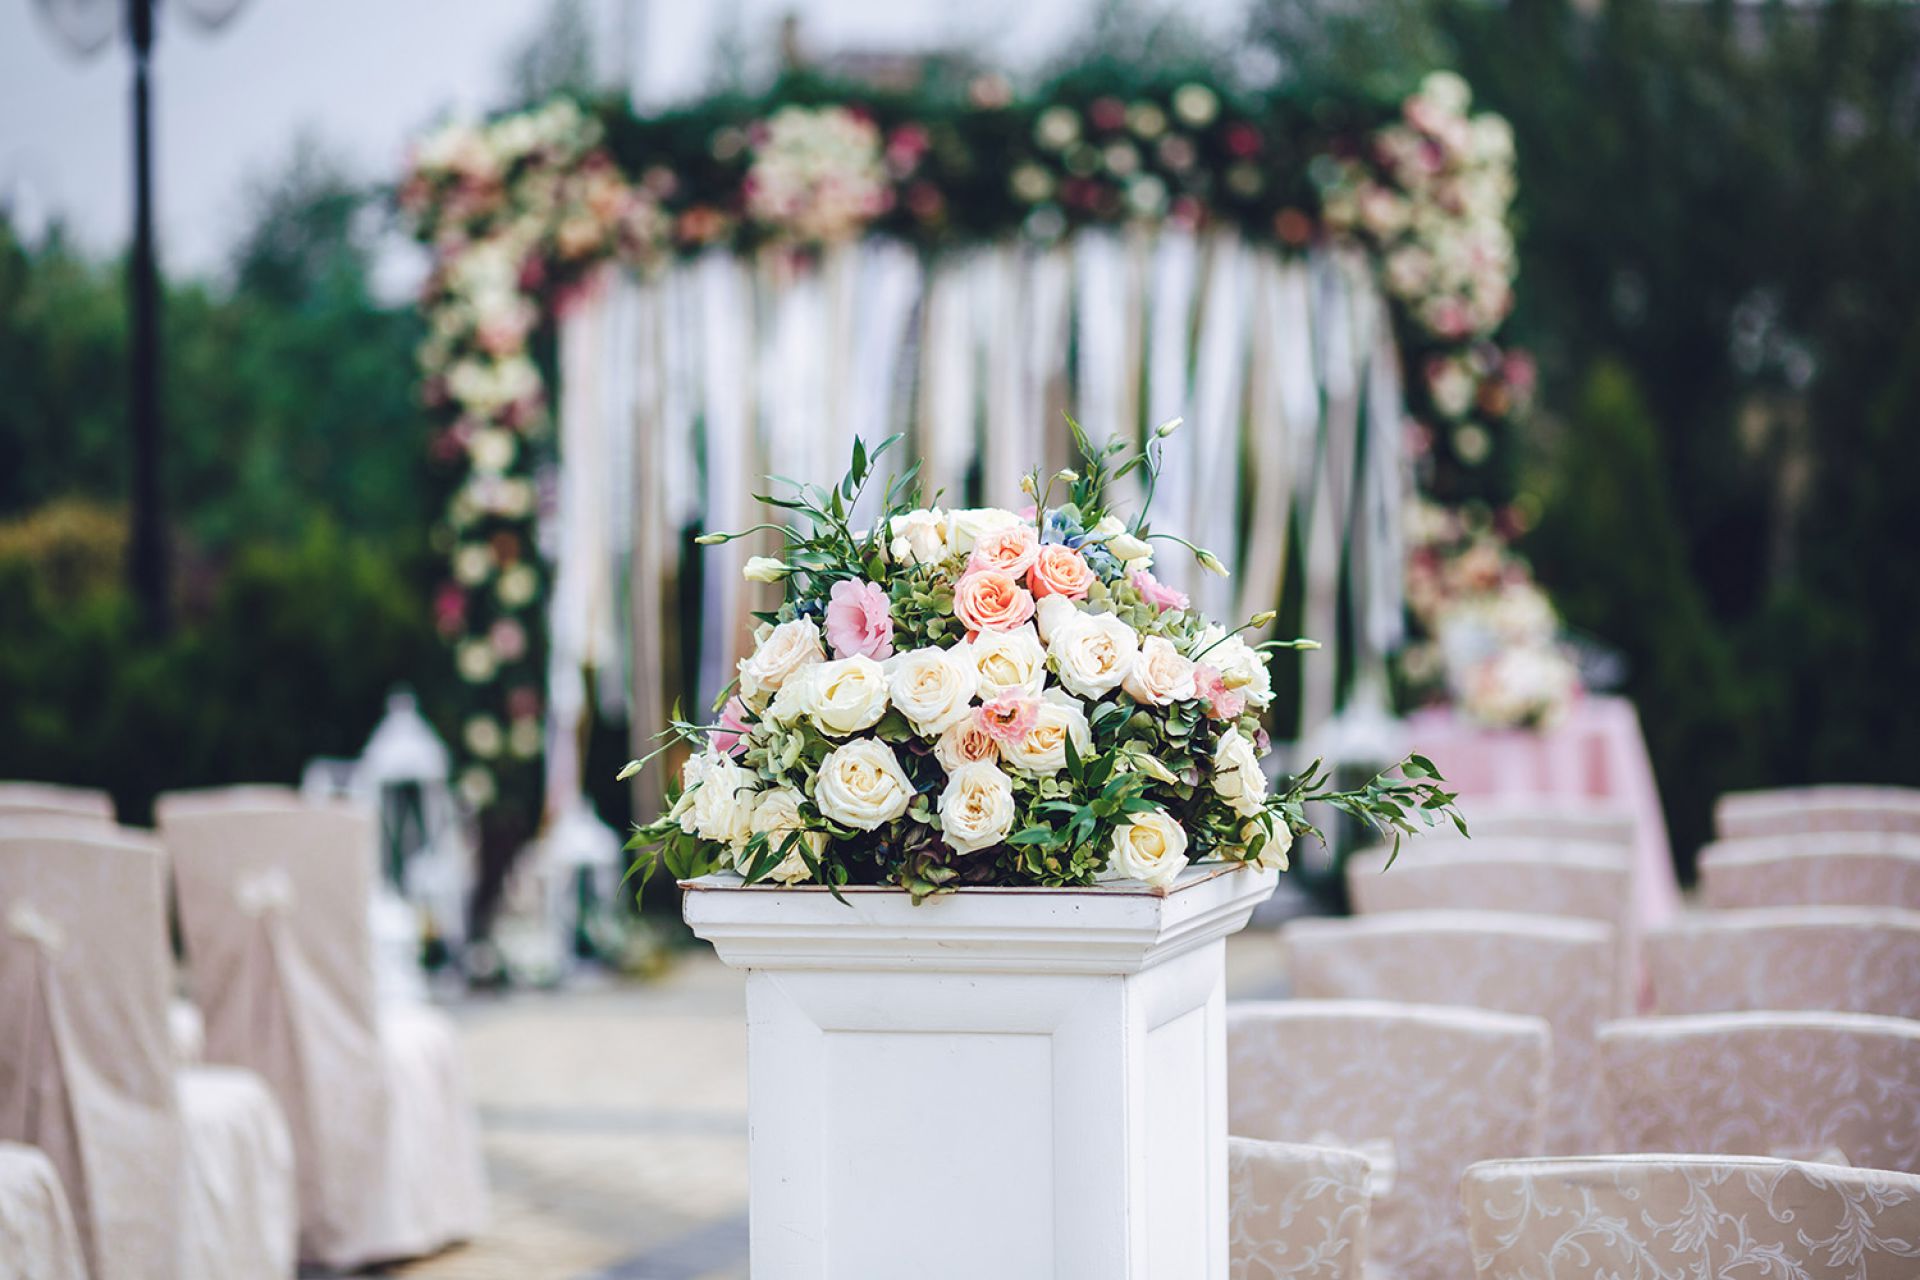 An image of ceremony decor with flowers